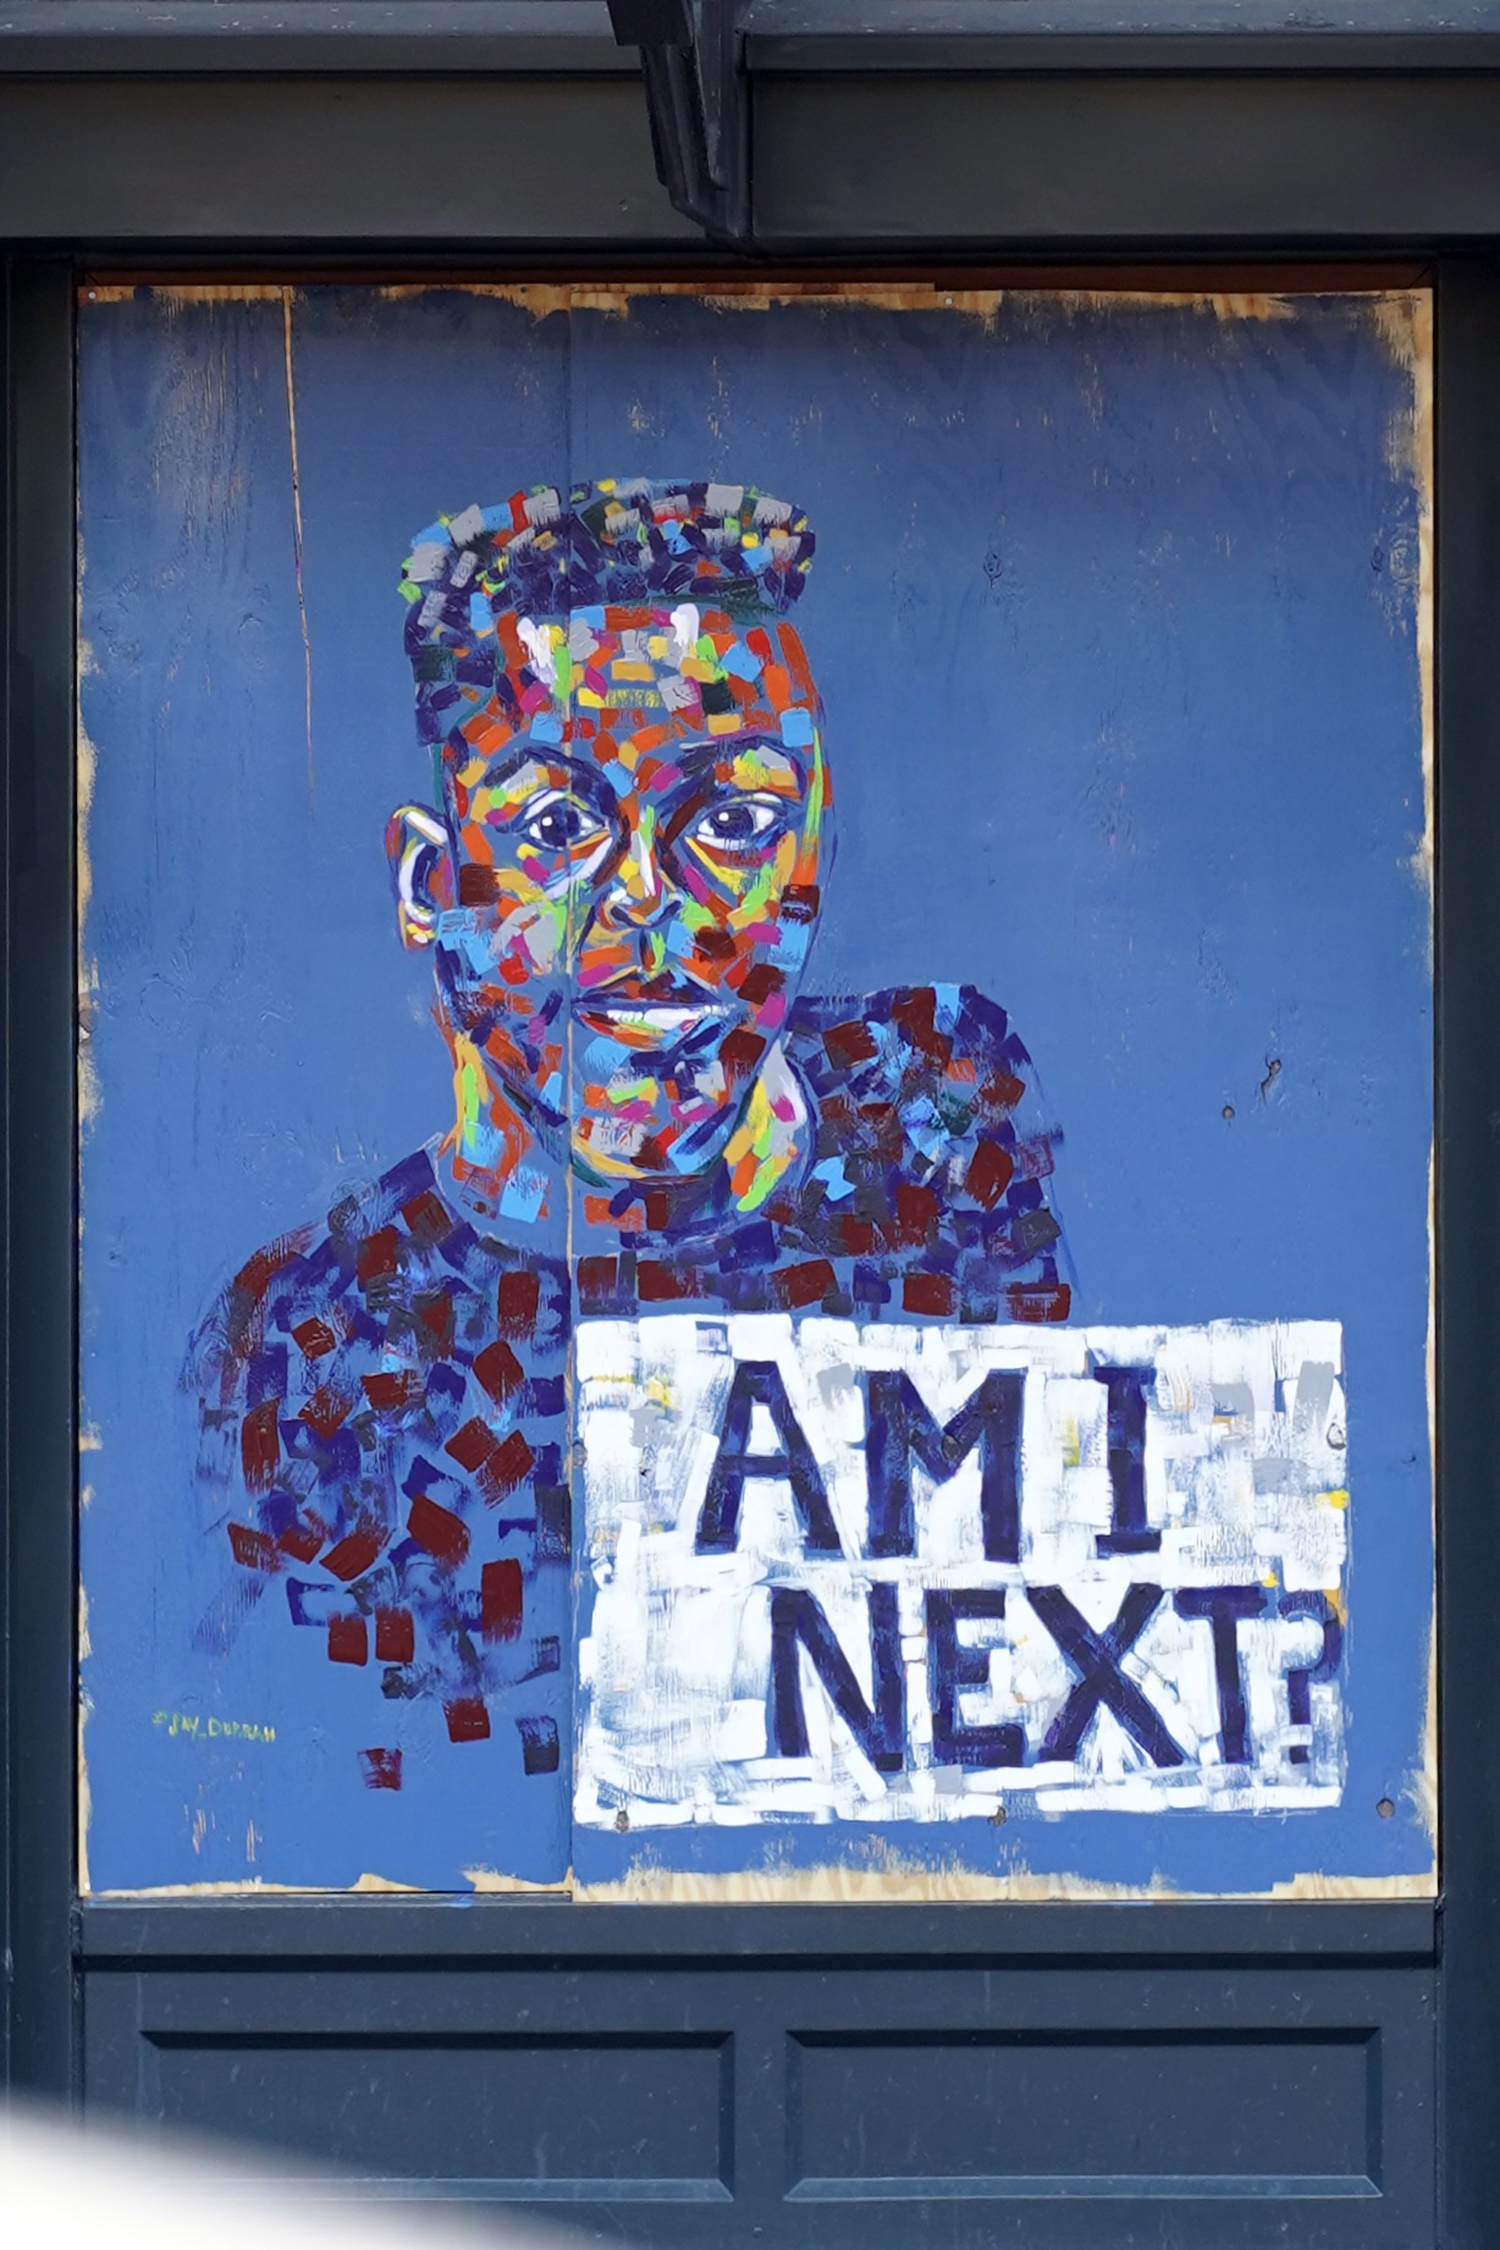 Gallery Place Murals 10: Am I Next?, by Jay Durrah